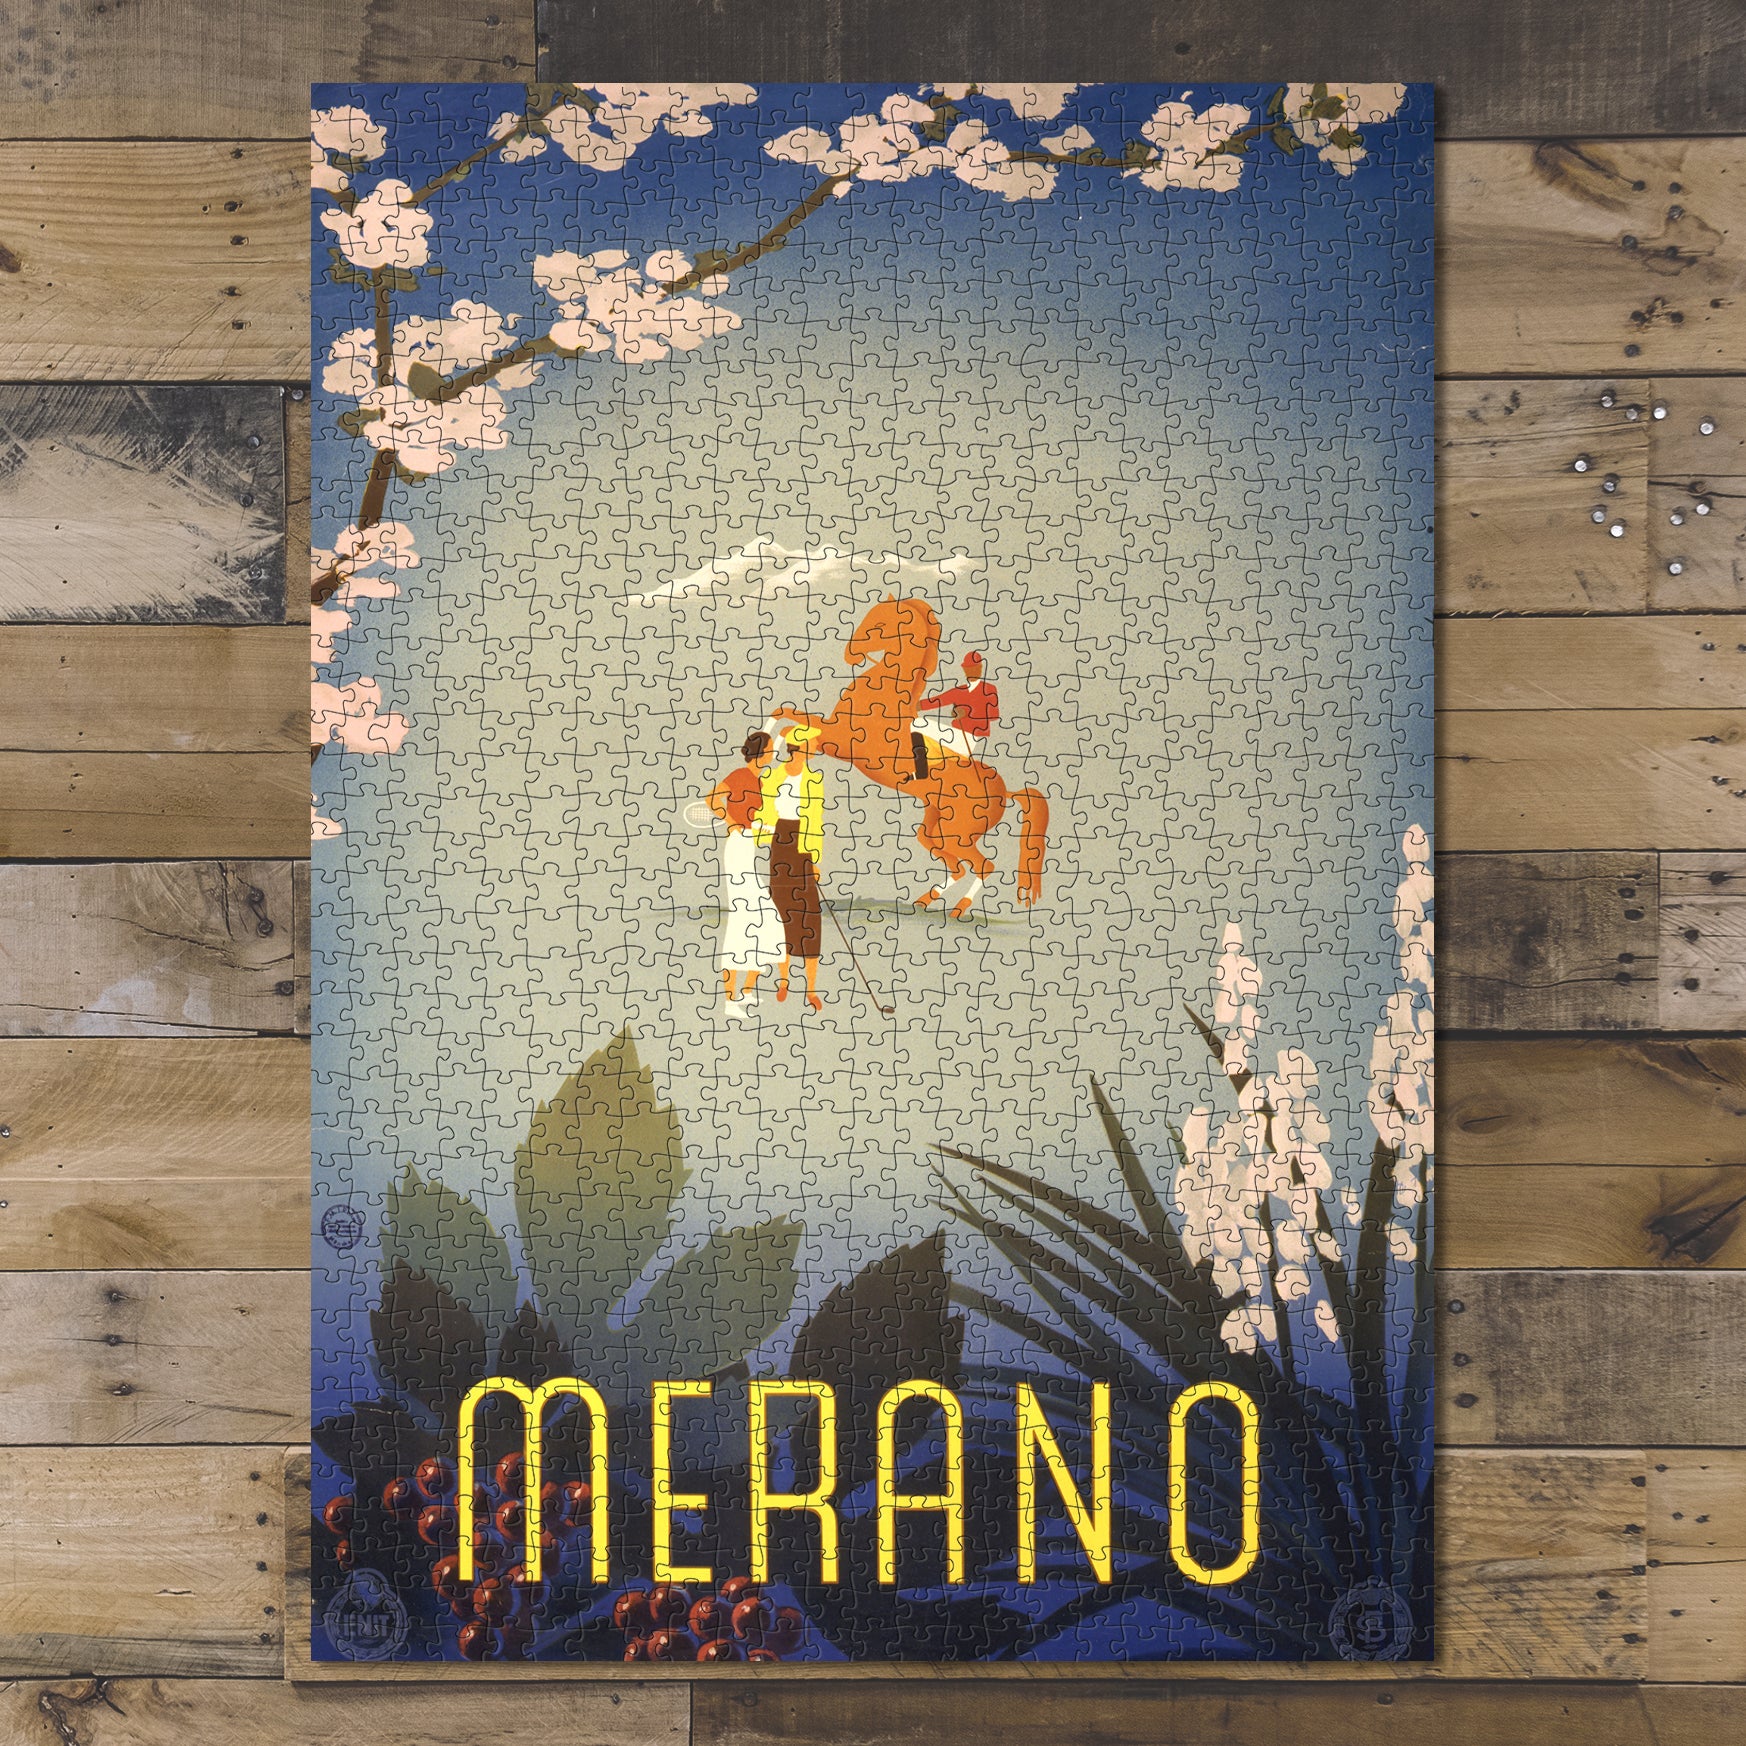 1000 piece puzzle Photo: Merano Travel poster showing a woman with a tennis racquet